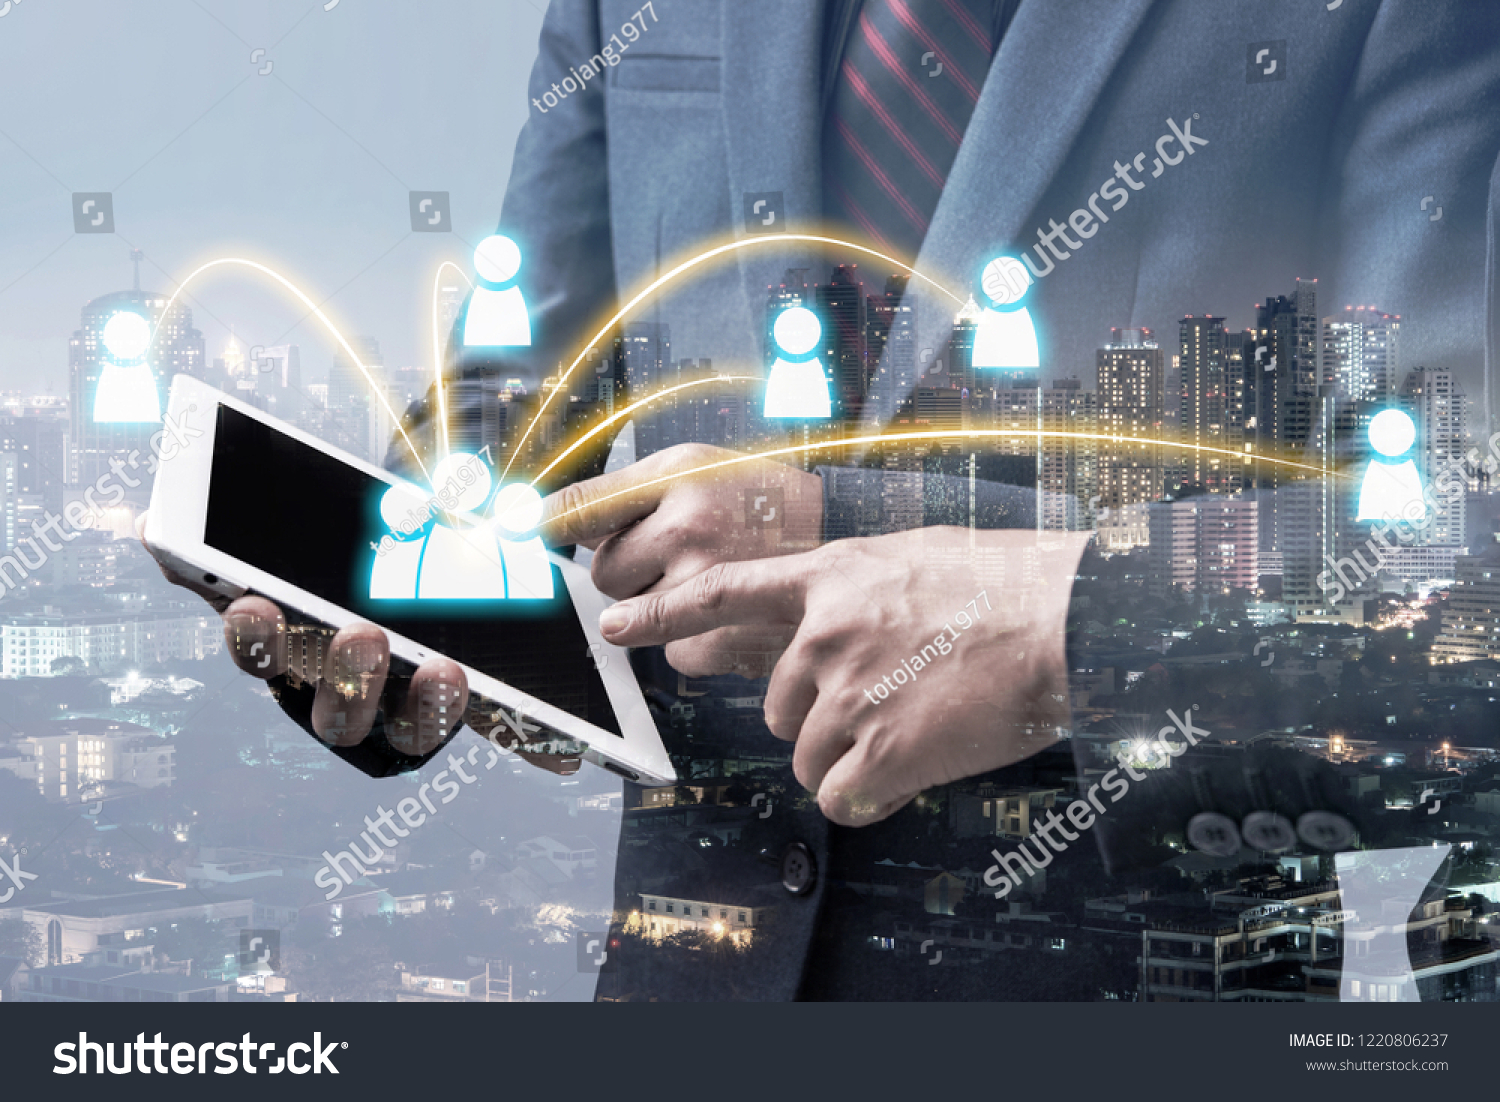 double exposure of businessman using tablet to connect with other people with blur city night background, network business connection concept. #1220806237